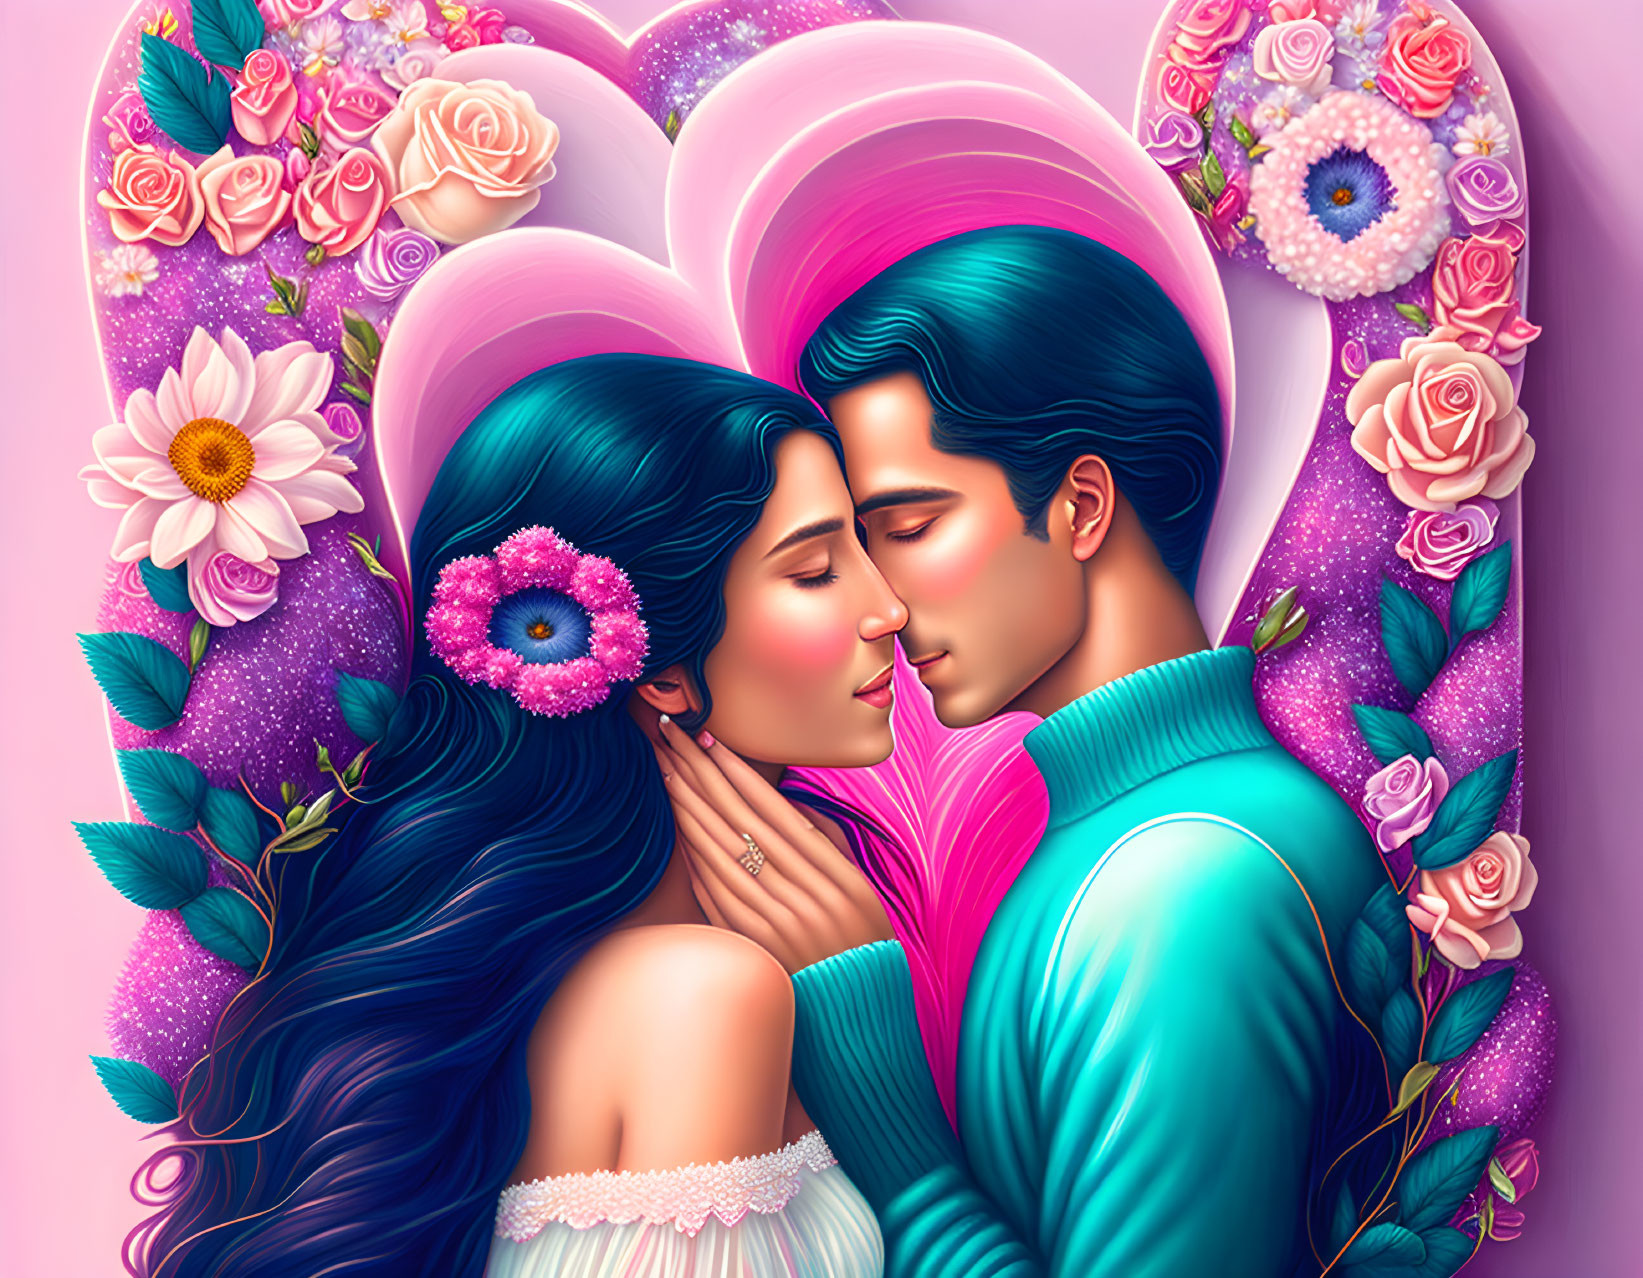 Vibrant illustrated couple embracing in heart-shaped floral scene